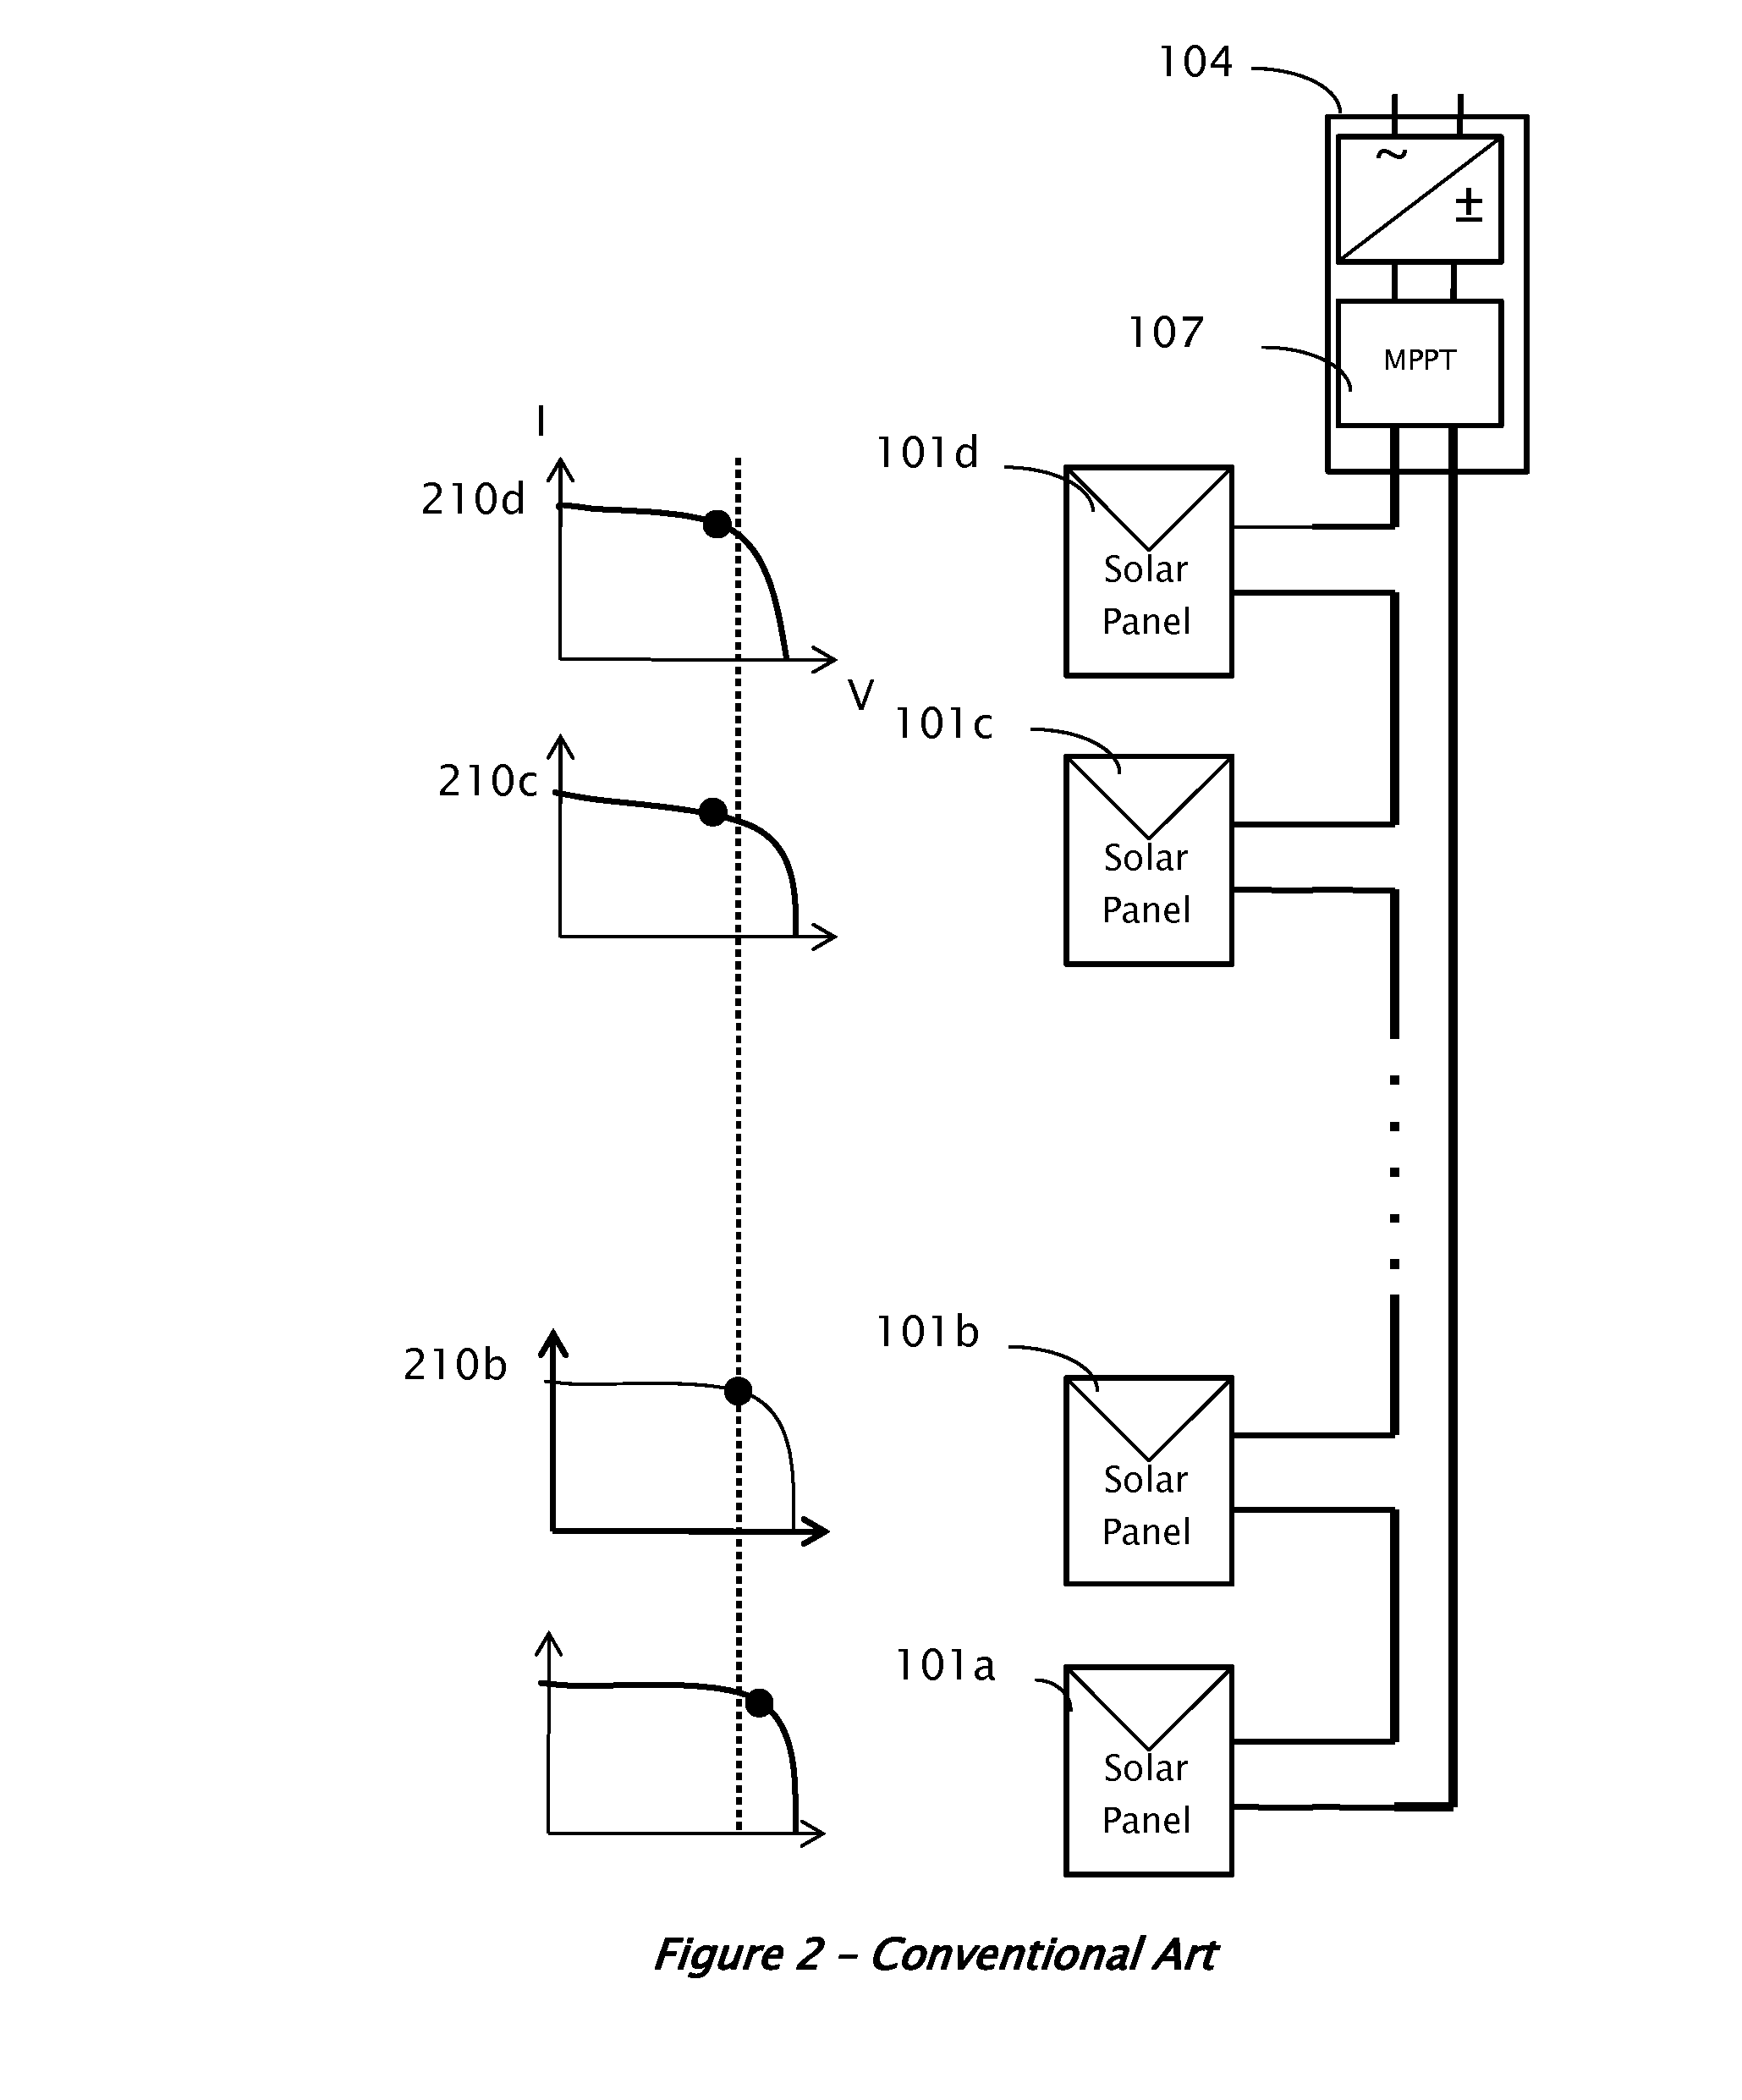 Circuit for interconnected direct current power sources